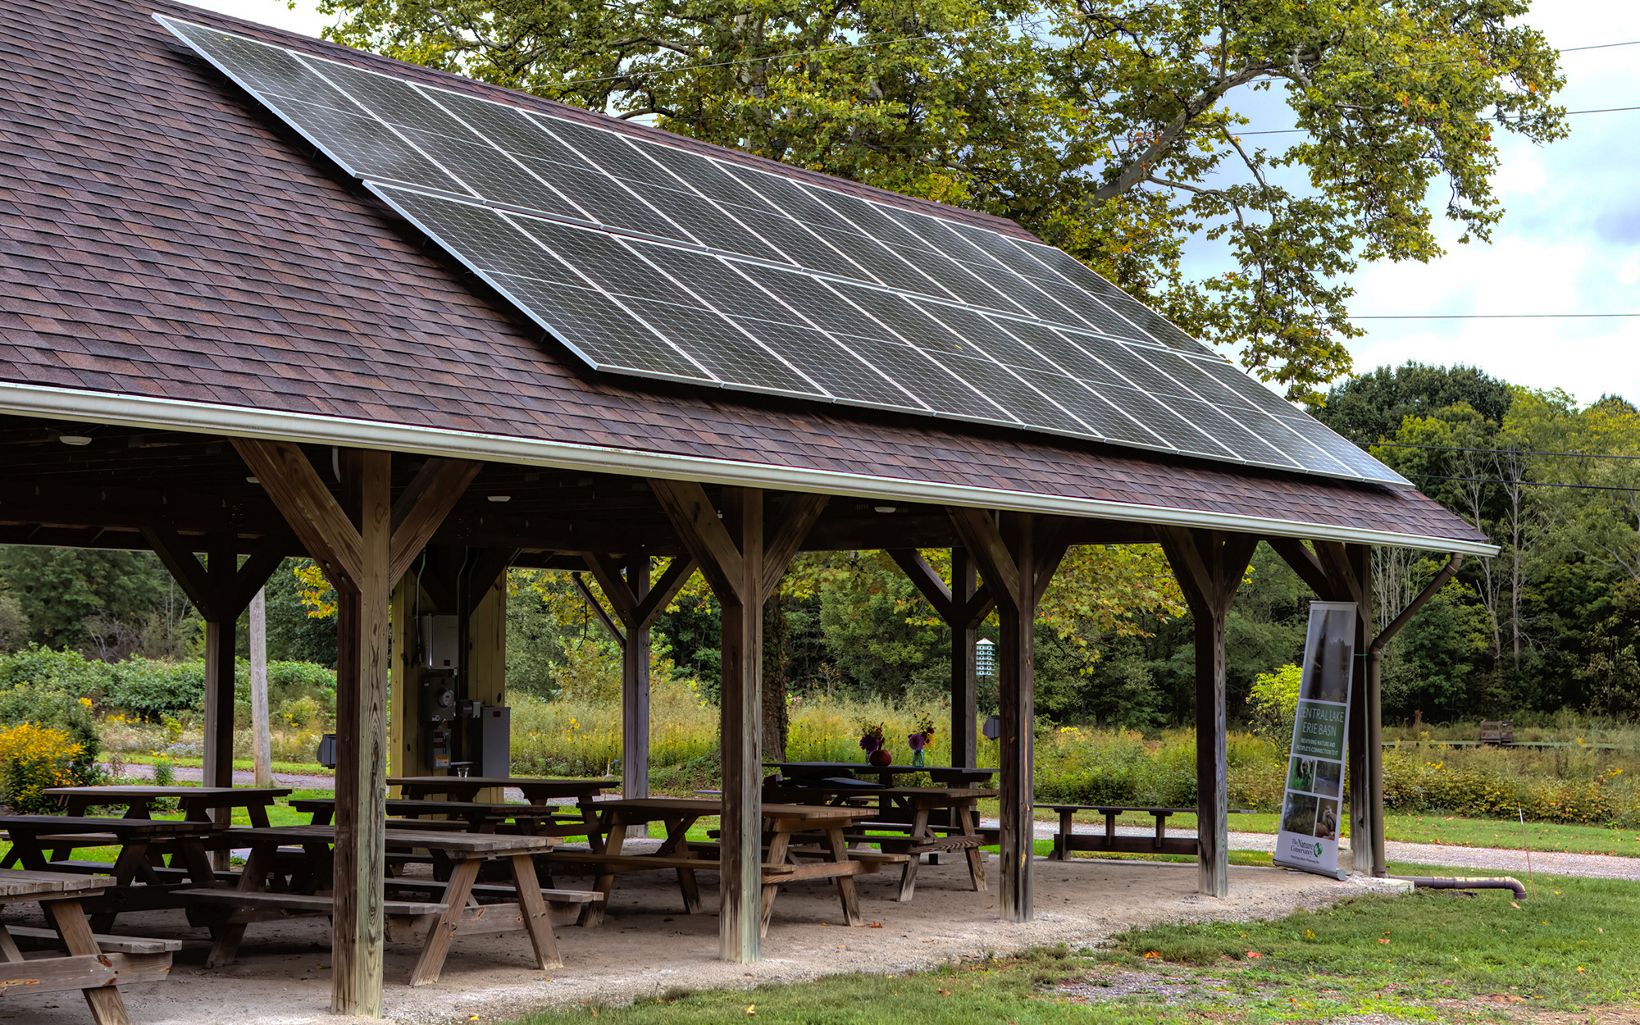 a picnic shelter outfitted with solar panels.